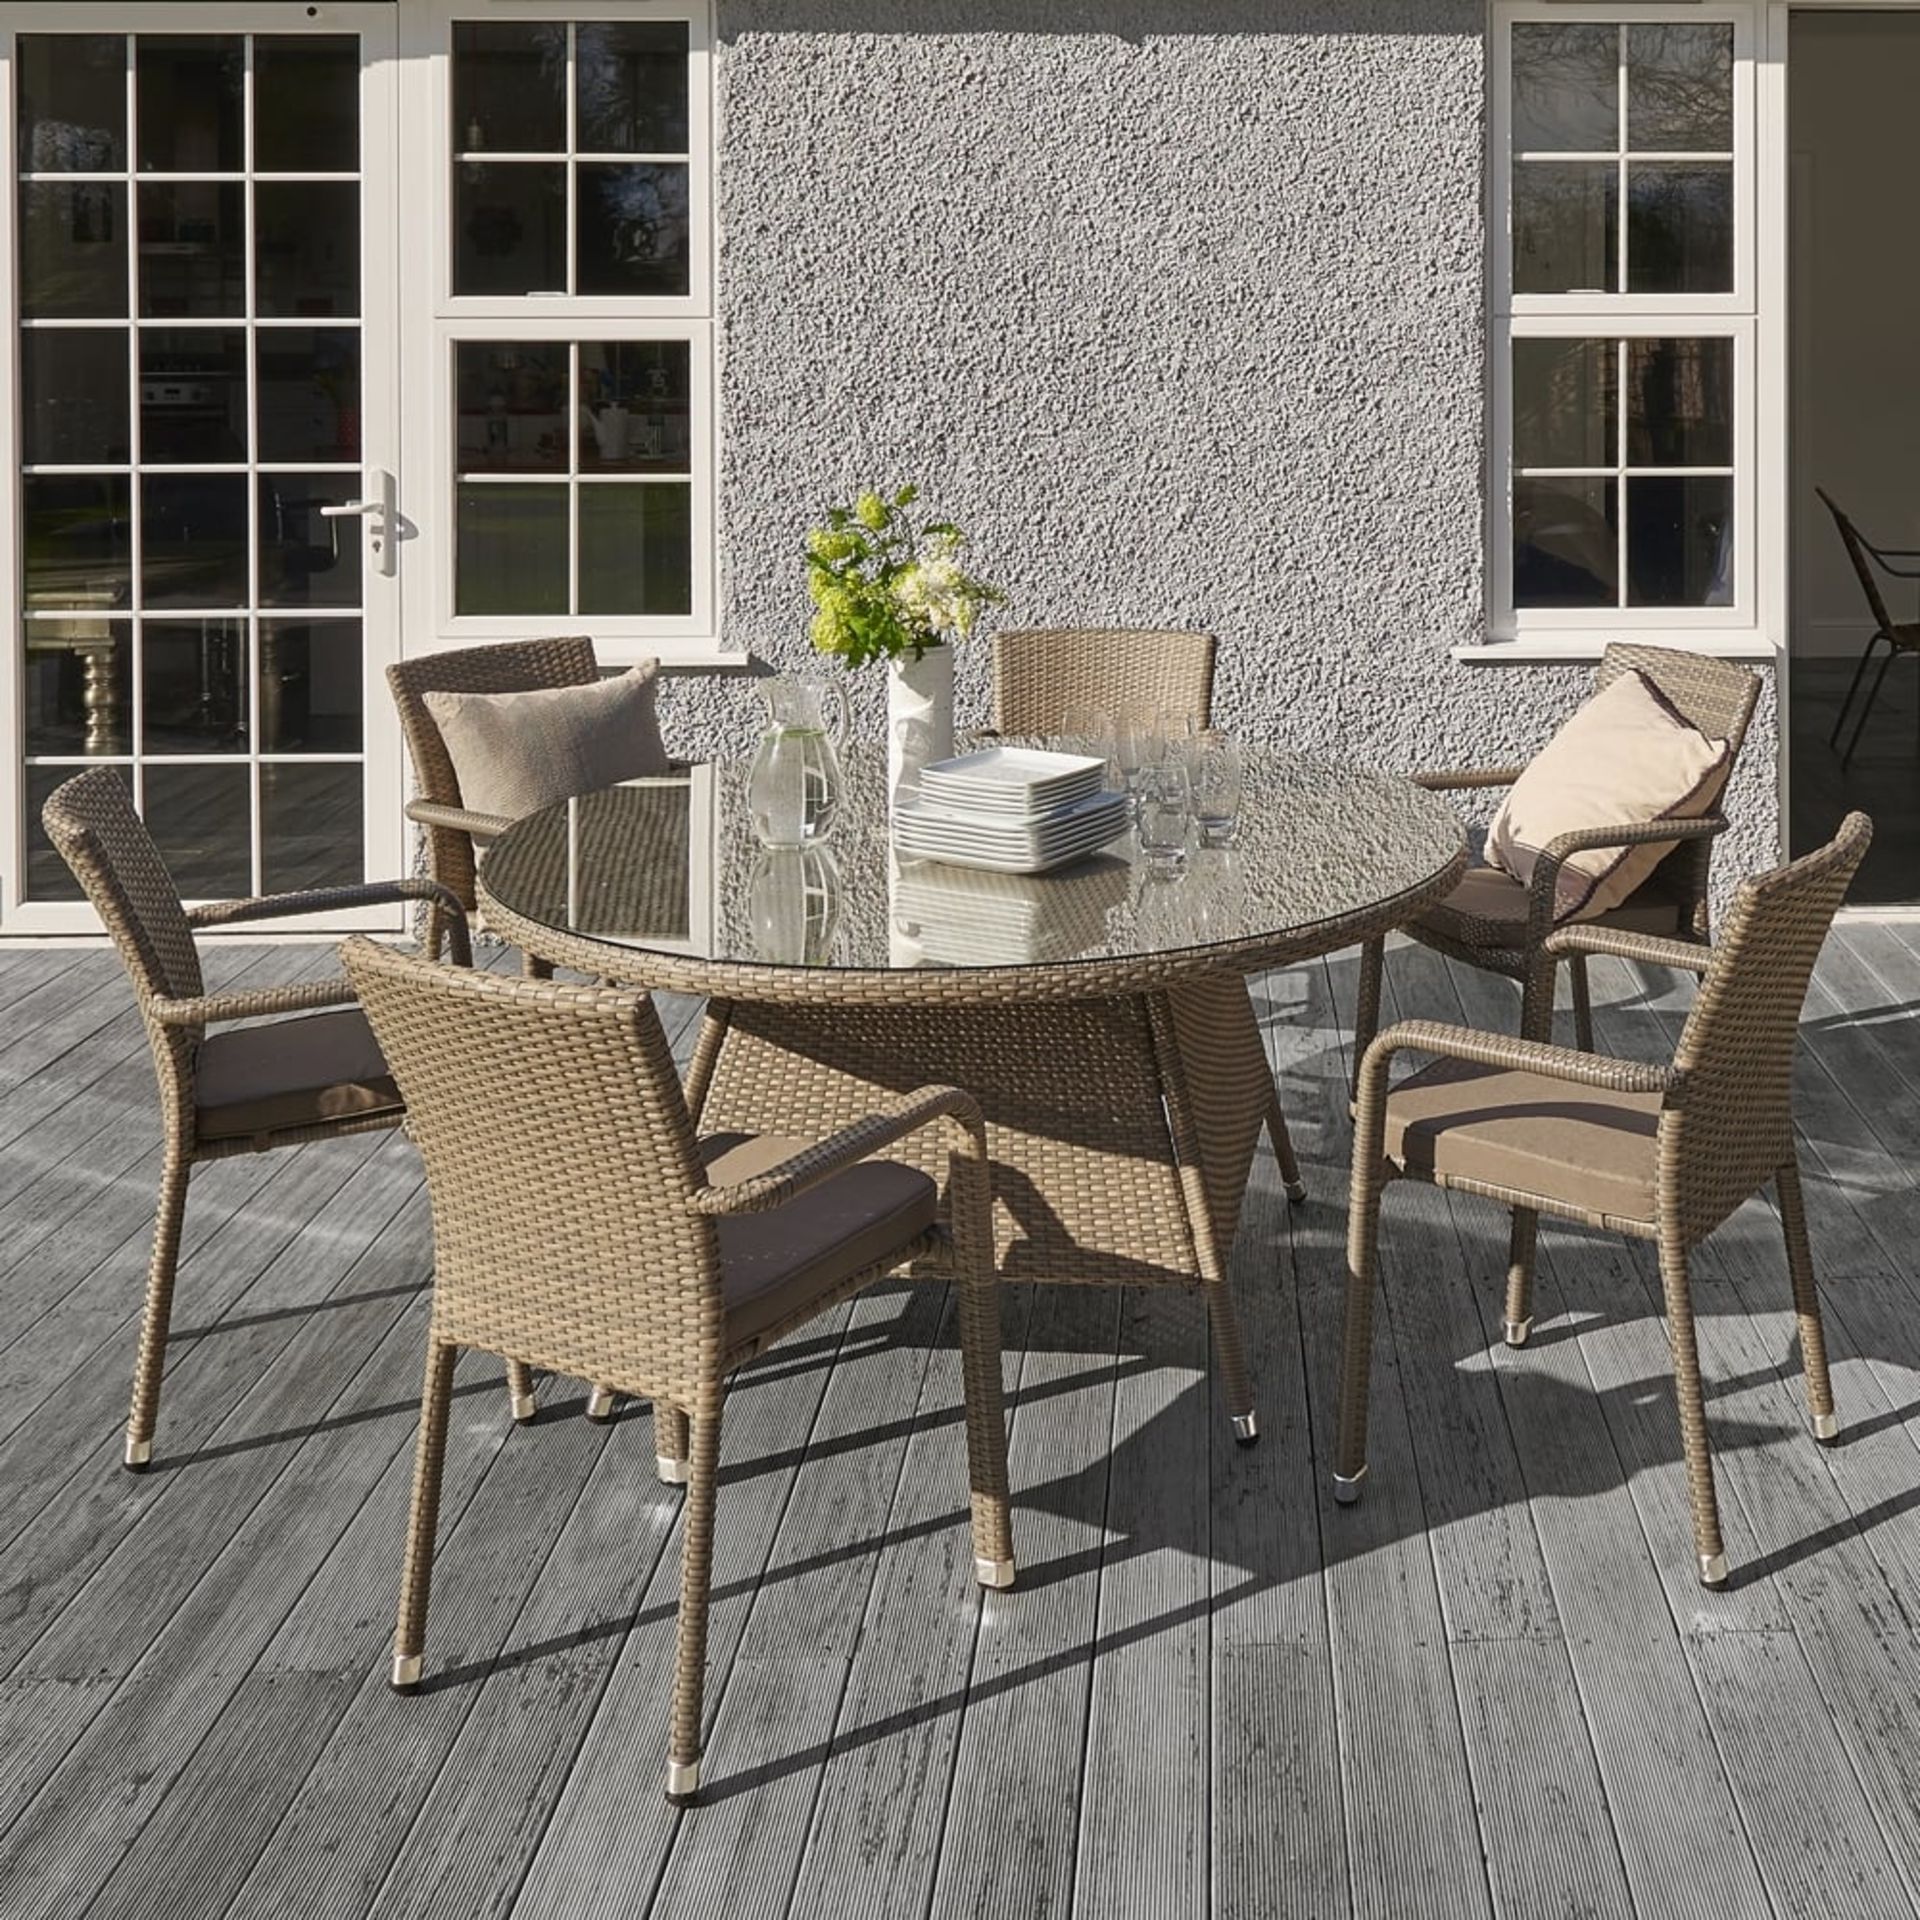 The Sicily rattan dining set in taupe consists of 6 stackable dining armchairs with grey cushions